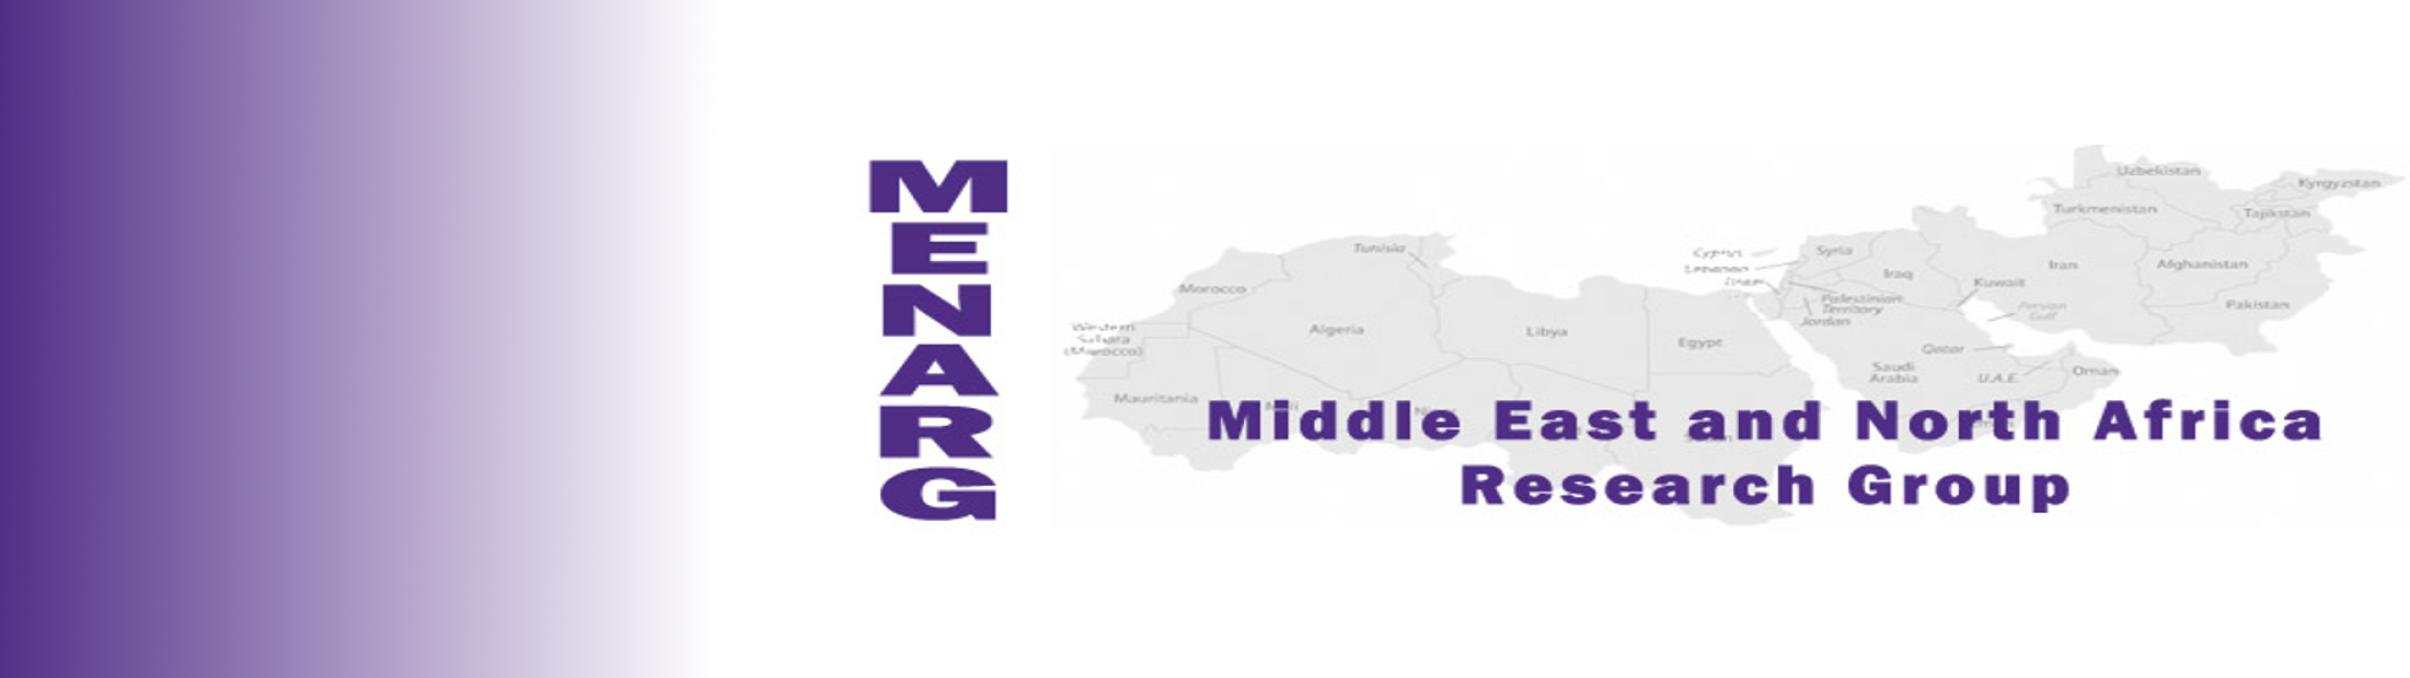 Middle East and North Africa Research Group